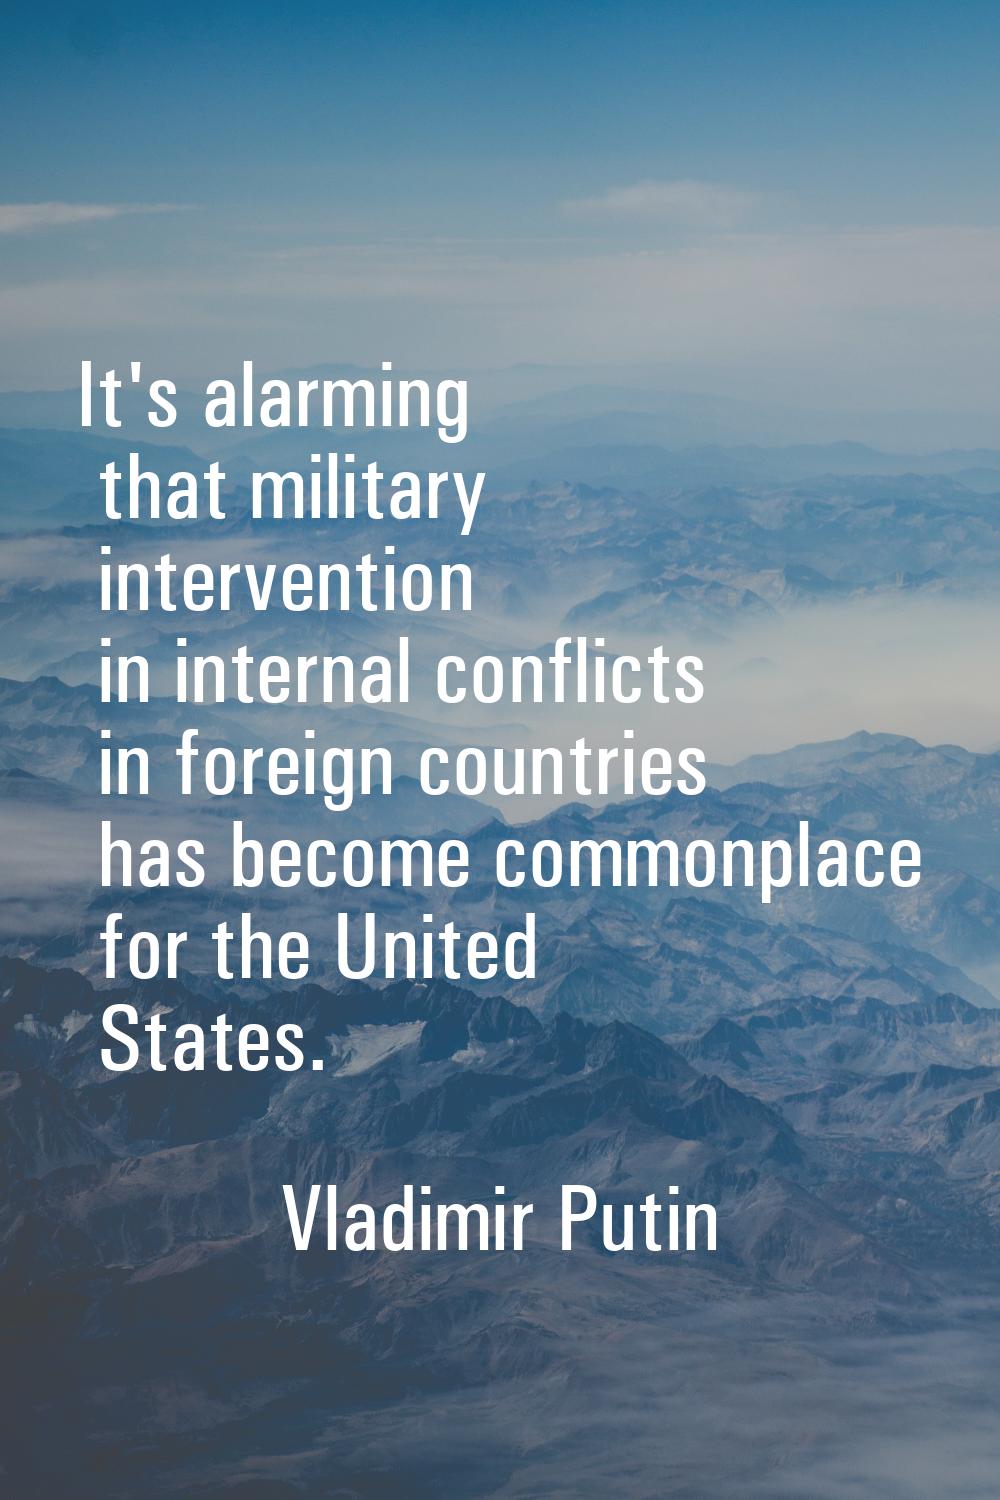 It's alarming that military intervention in internal conflicts in foreign countries has become comm